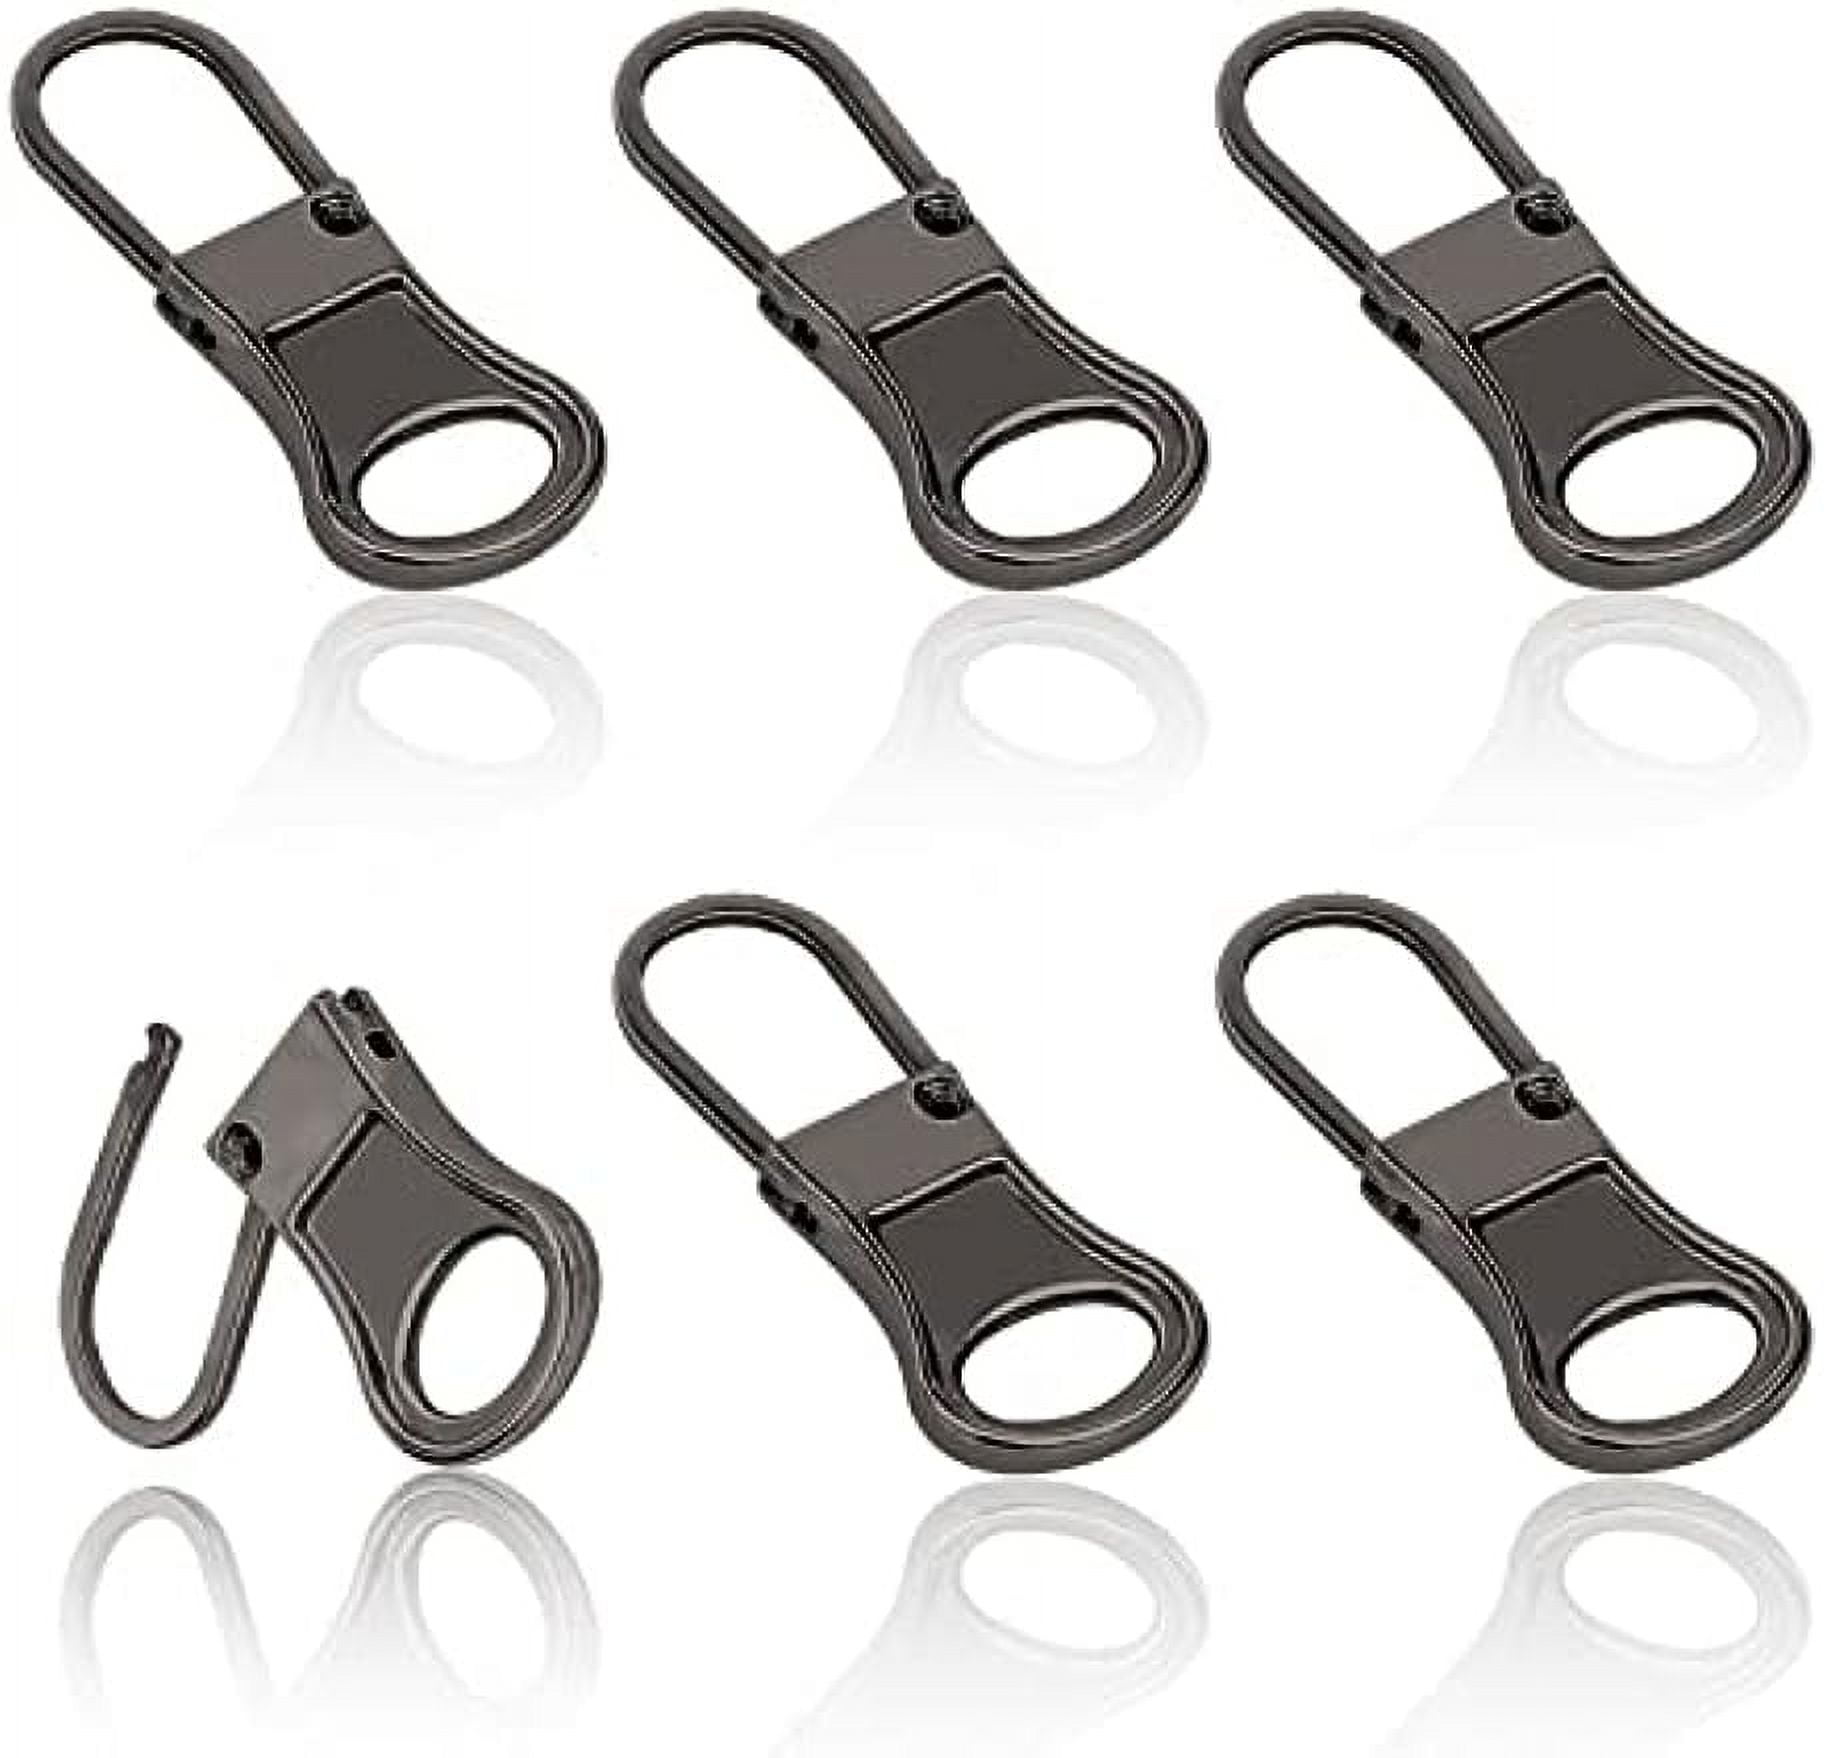 Replacement Zipper Pulls, Protect Your Tall Boot Zippers from Repairs